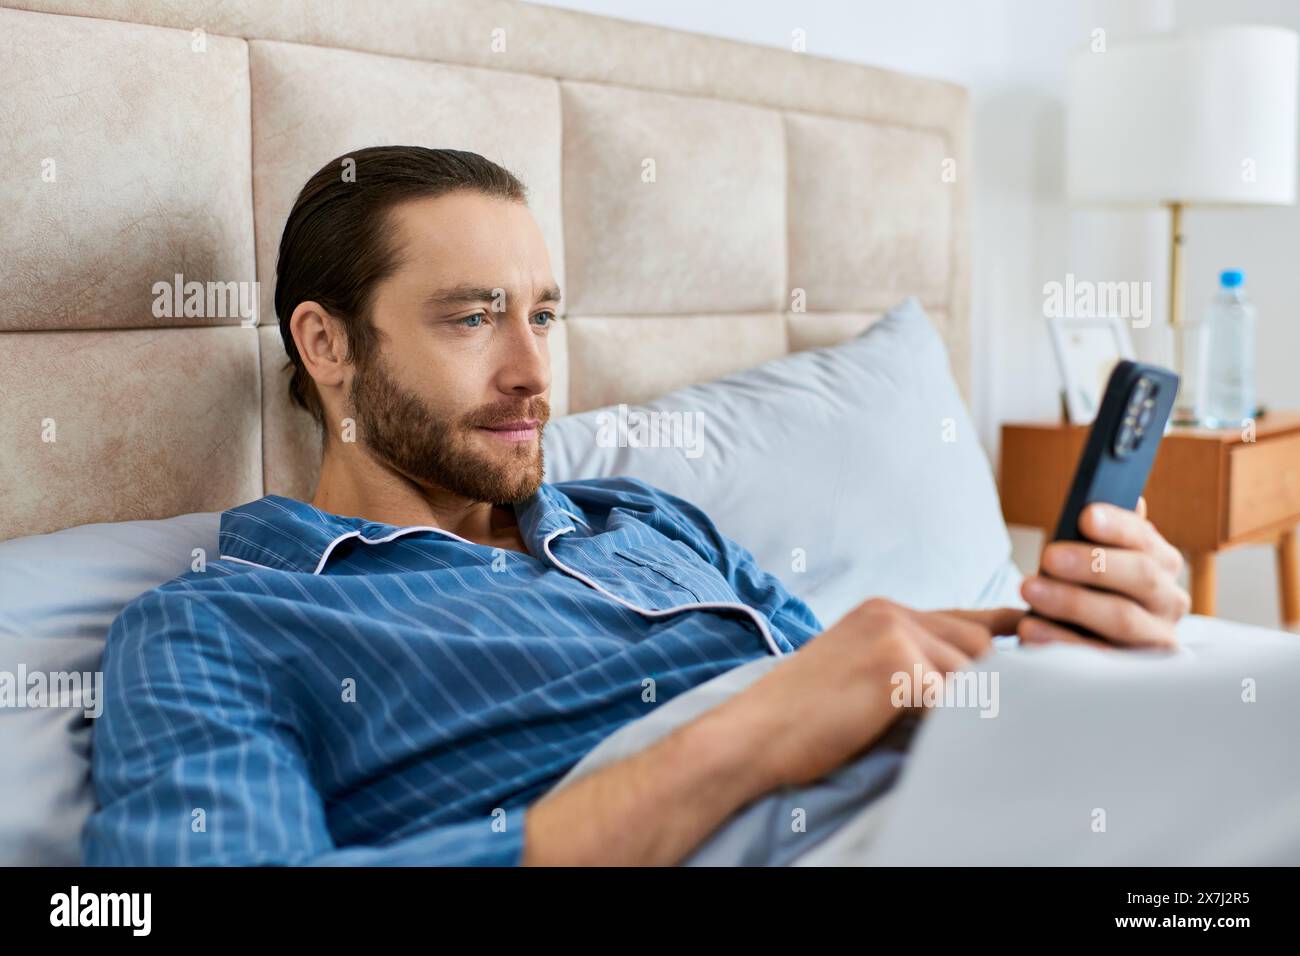 Man peacefully rests in bed, holding phone. Stock Photo